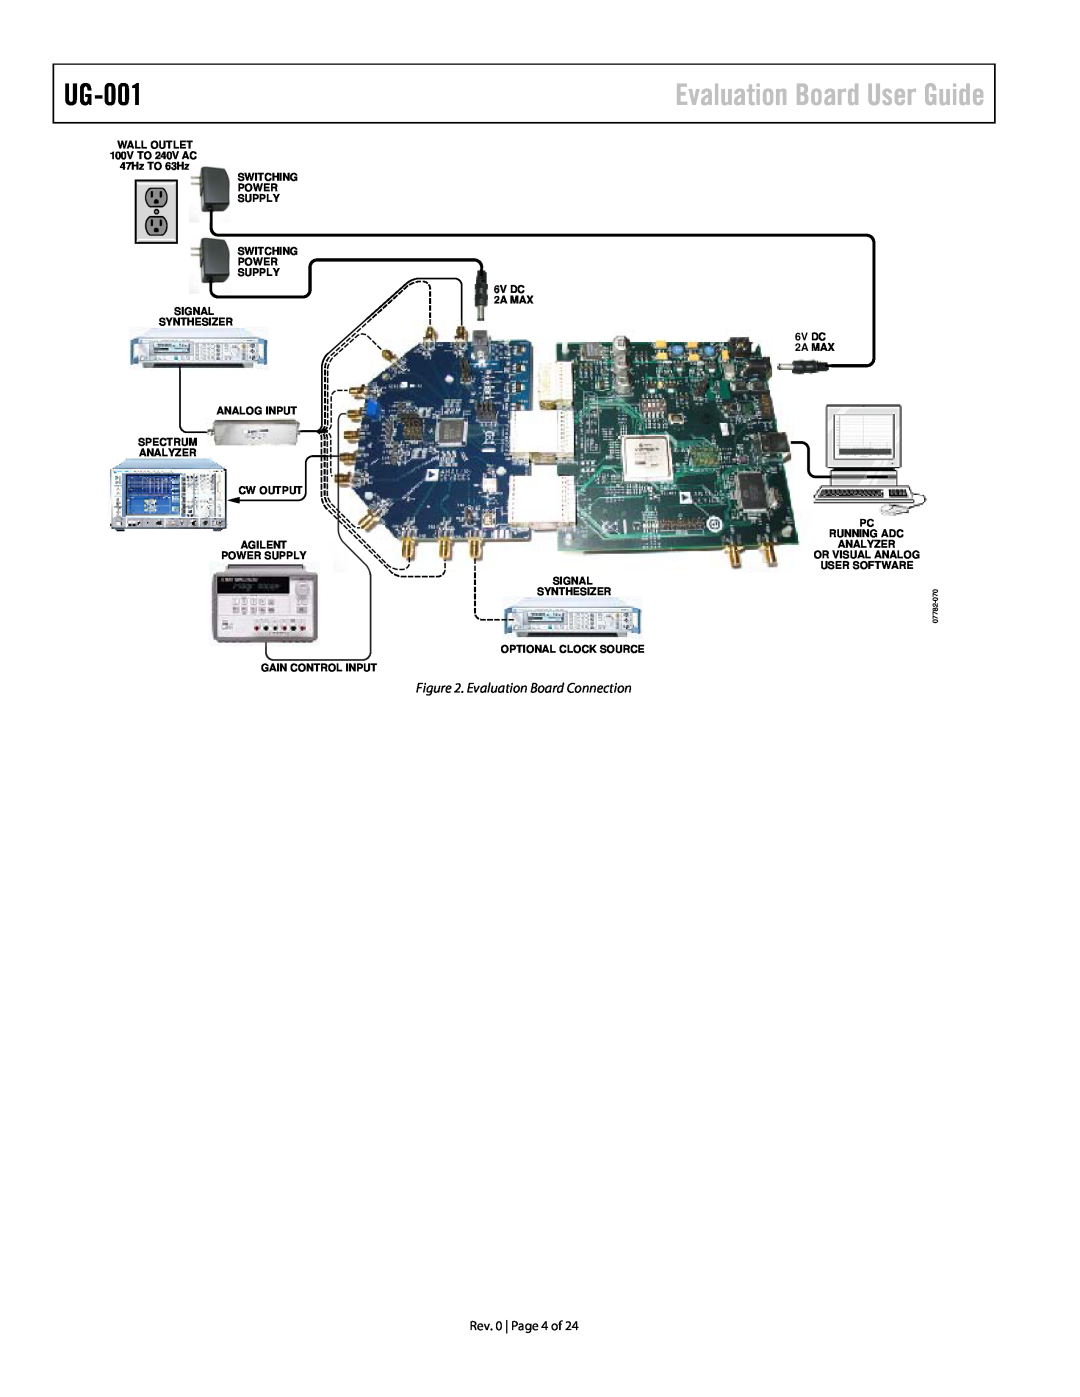 Analog Devices AD9273, AD9272 UG-001, Evaluation Board User Guide, Evaluation Board Connection, Rev. 0, 07782-070 